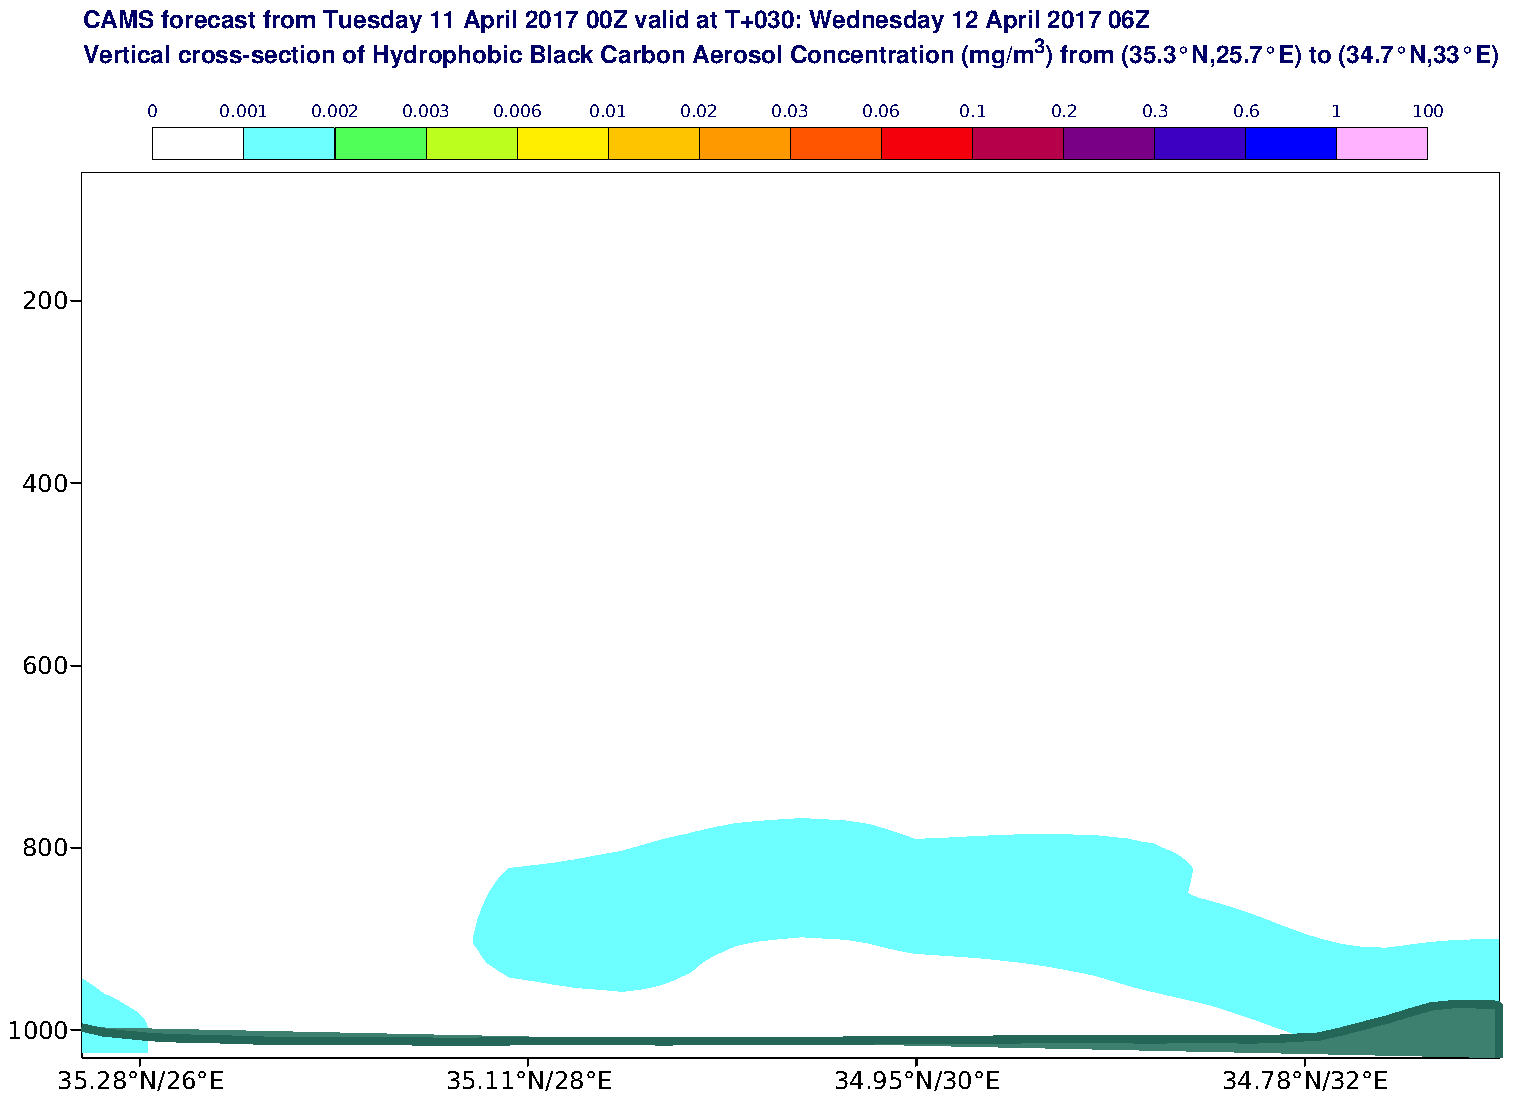 Vertical cross-section of Hydrophobic Black Carbon Aerosol Concentration (mg/m3) valid at T30 - 2017-04-12 06:00